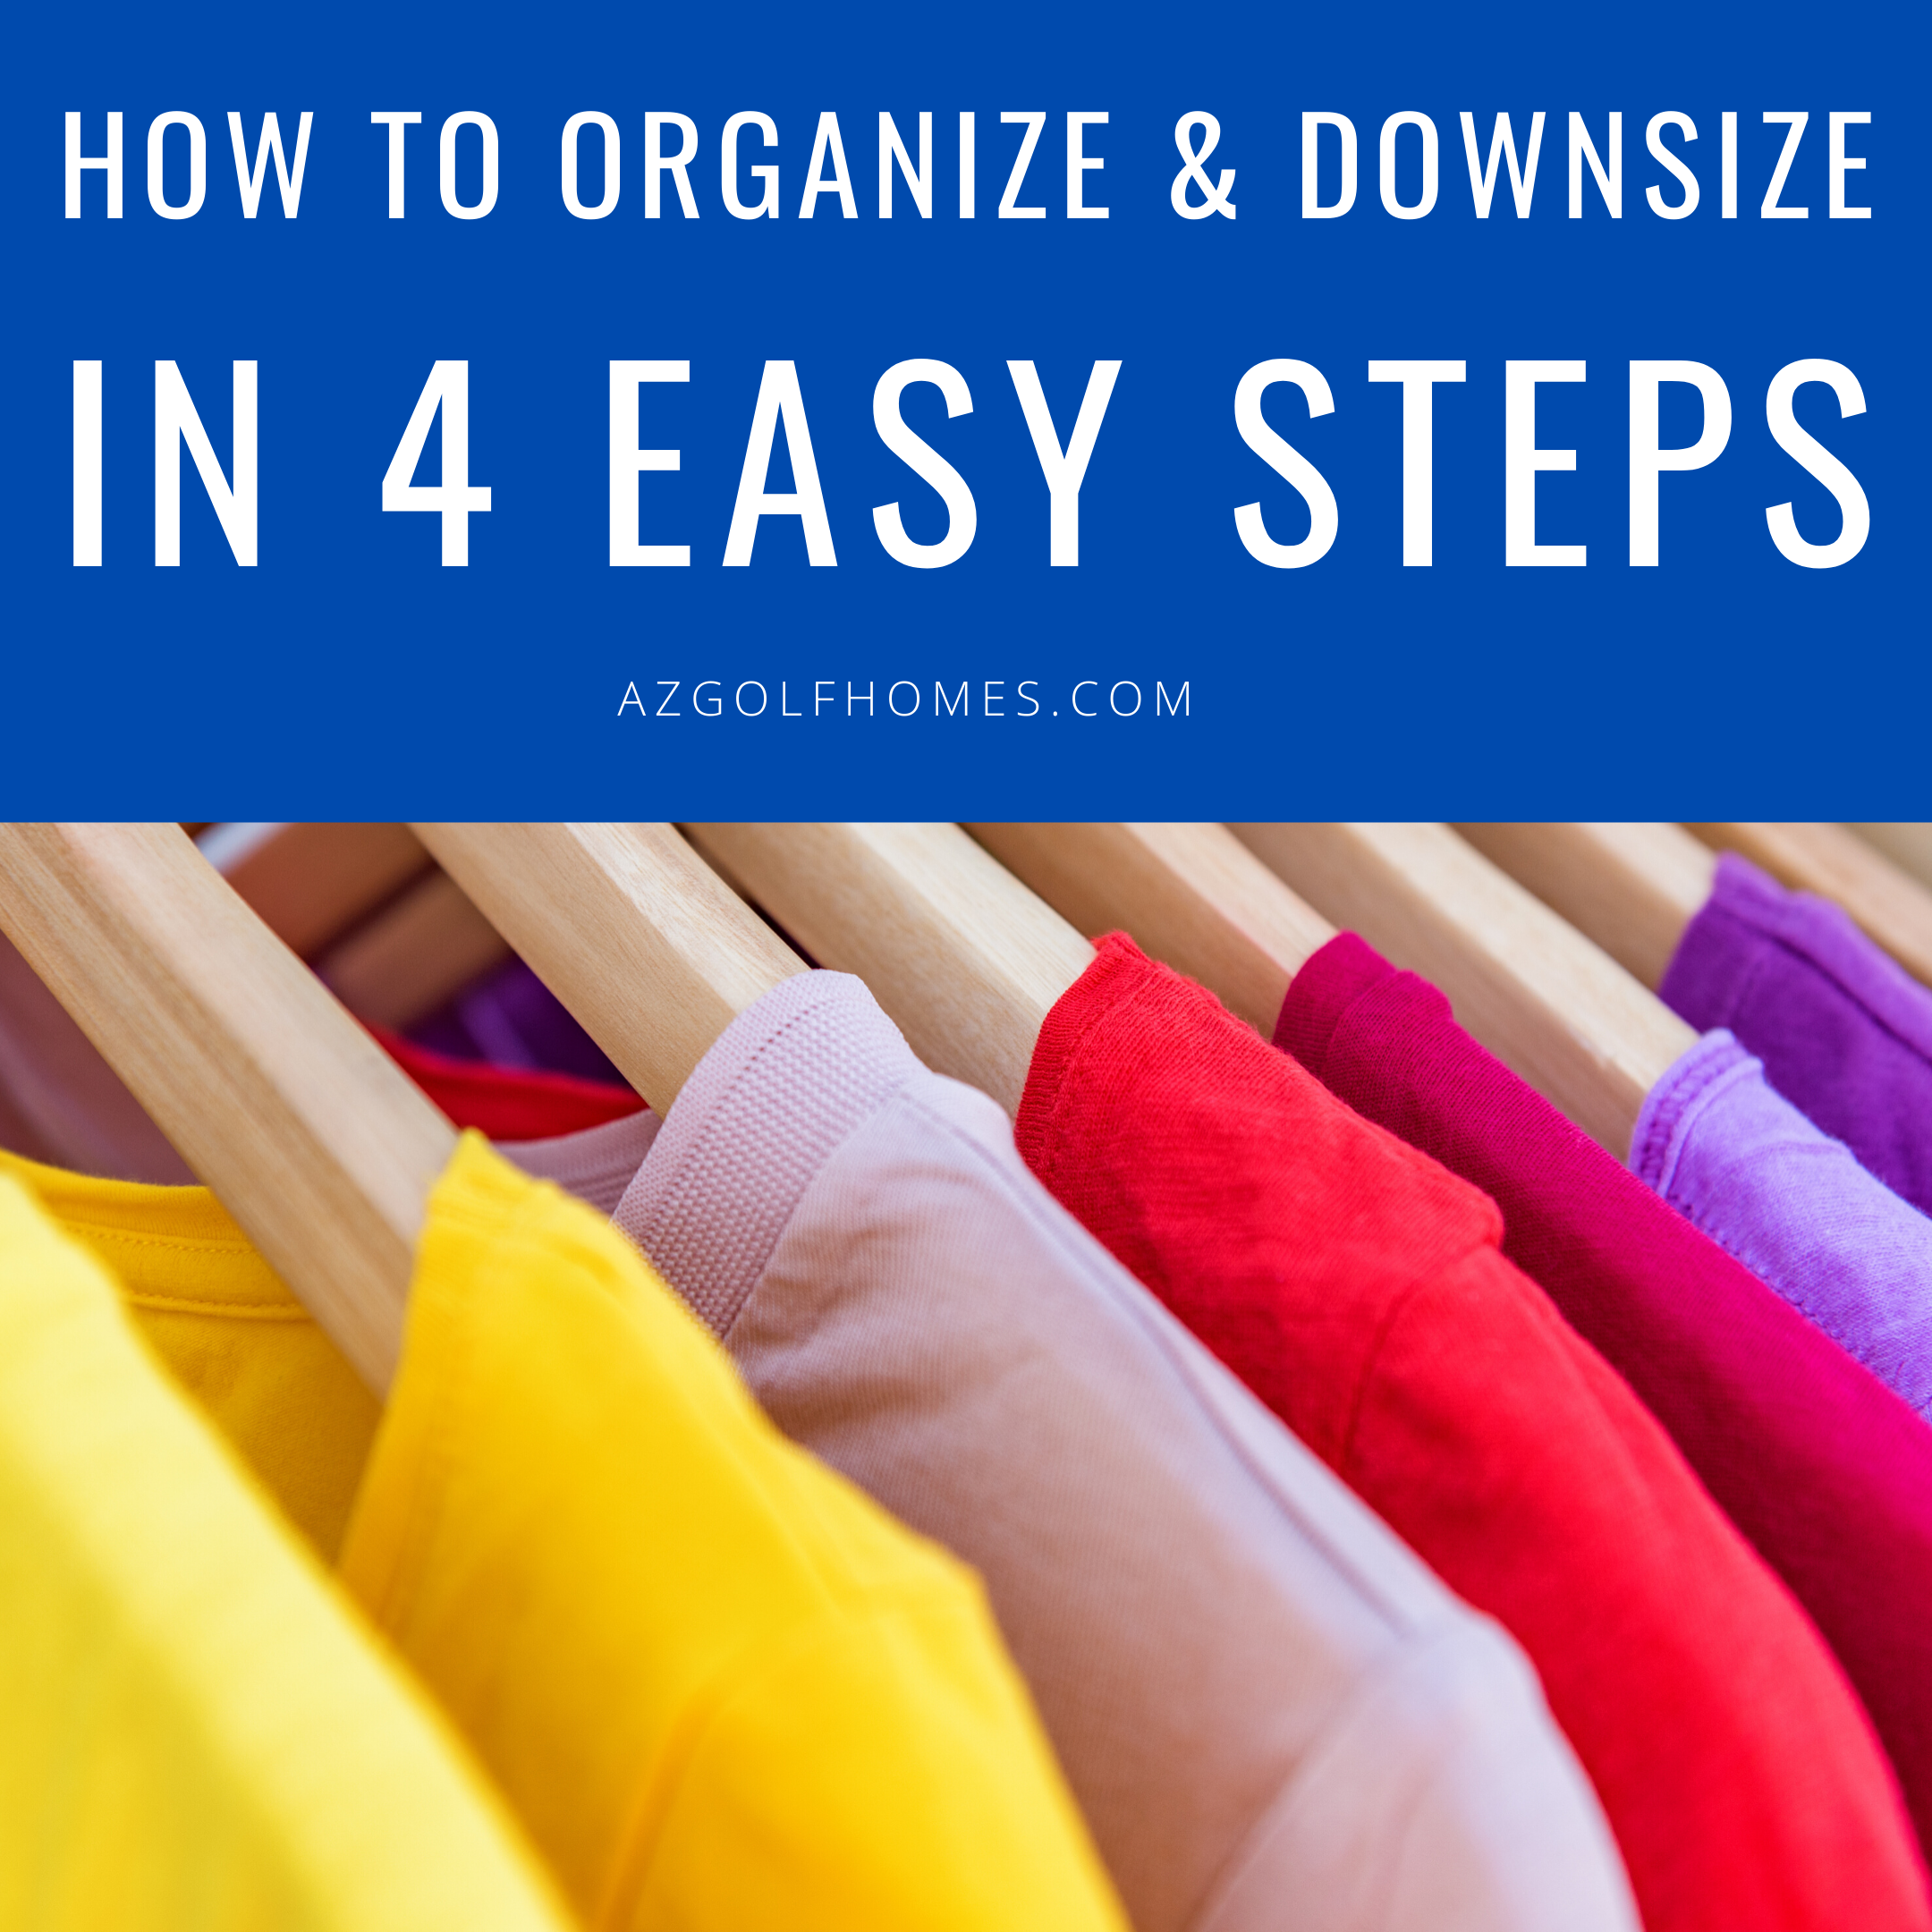 How to Organize and Downsize in 4 Easy Steps